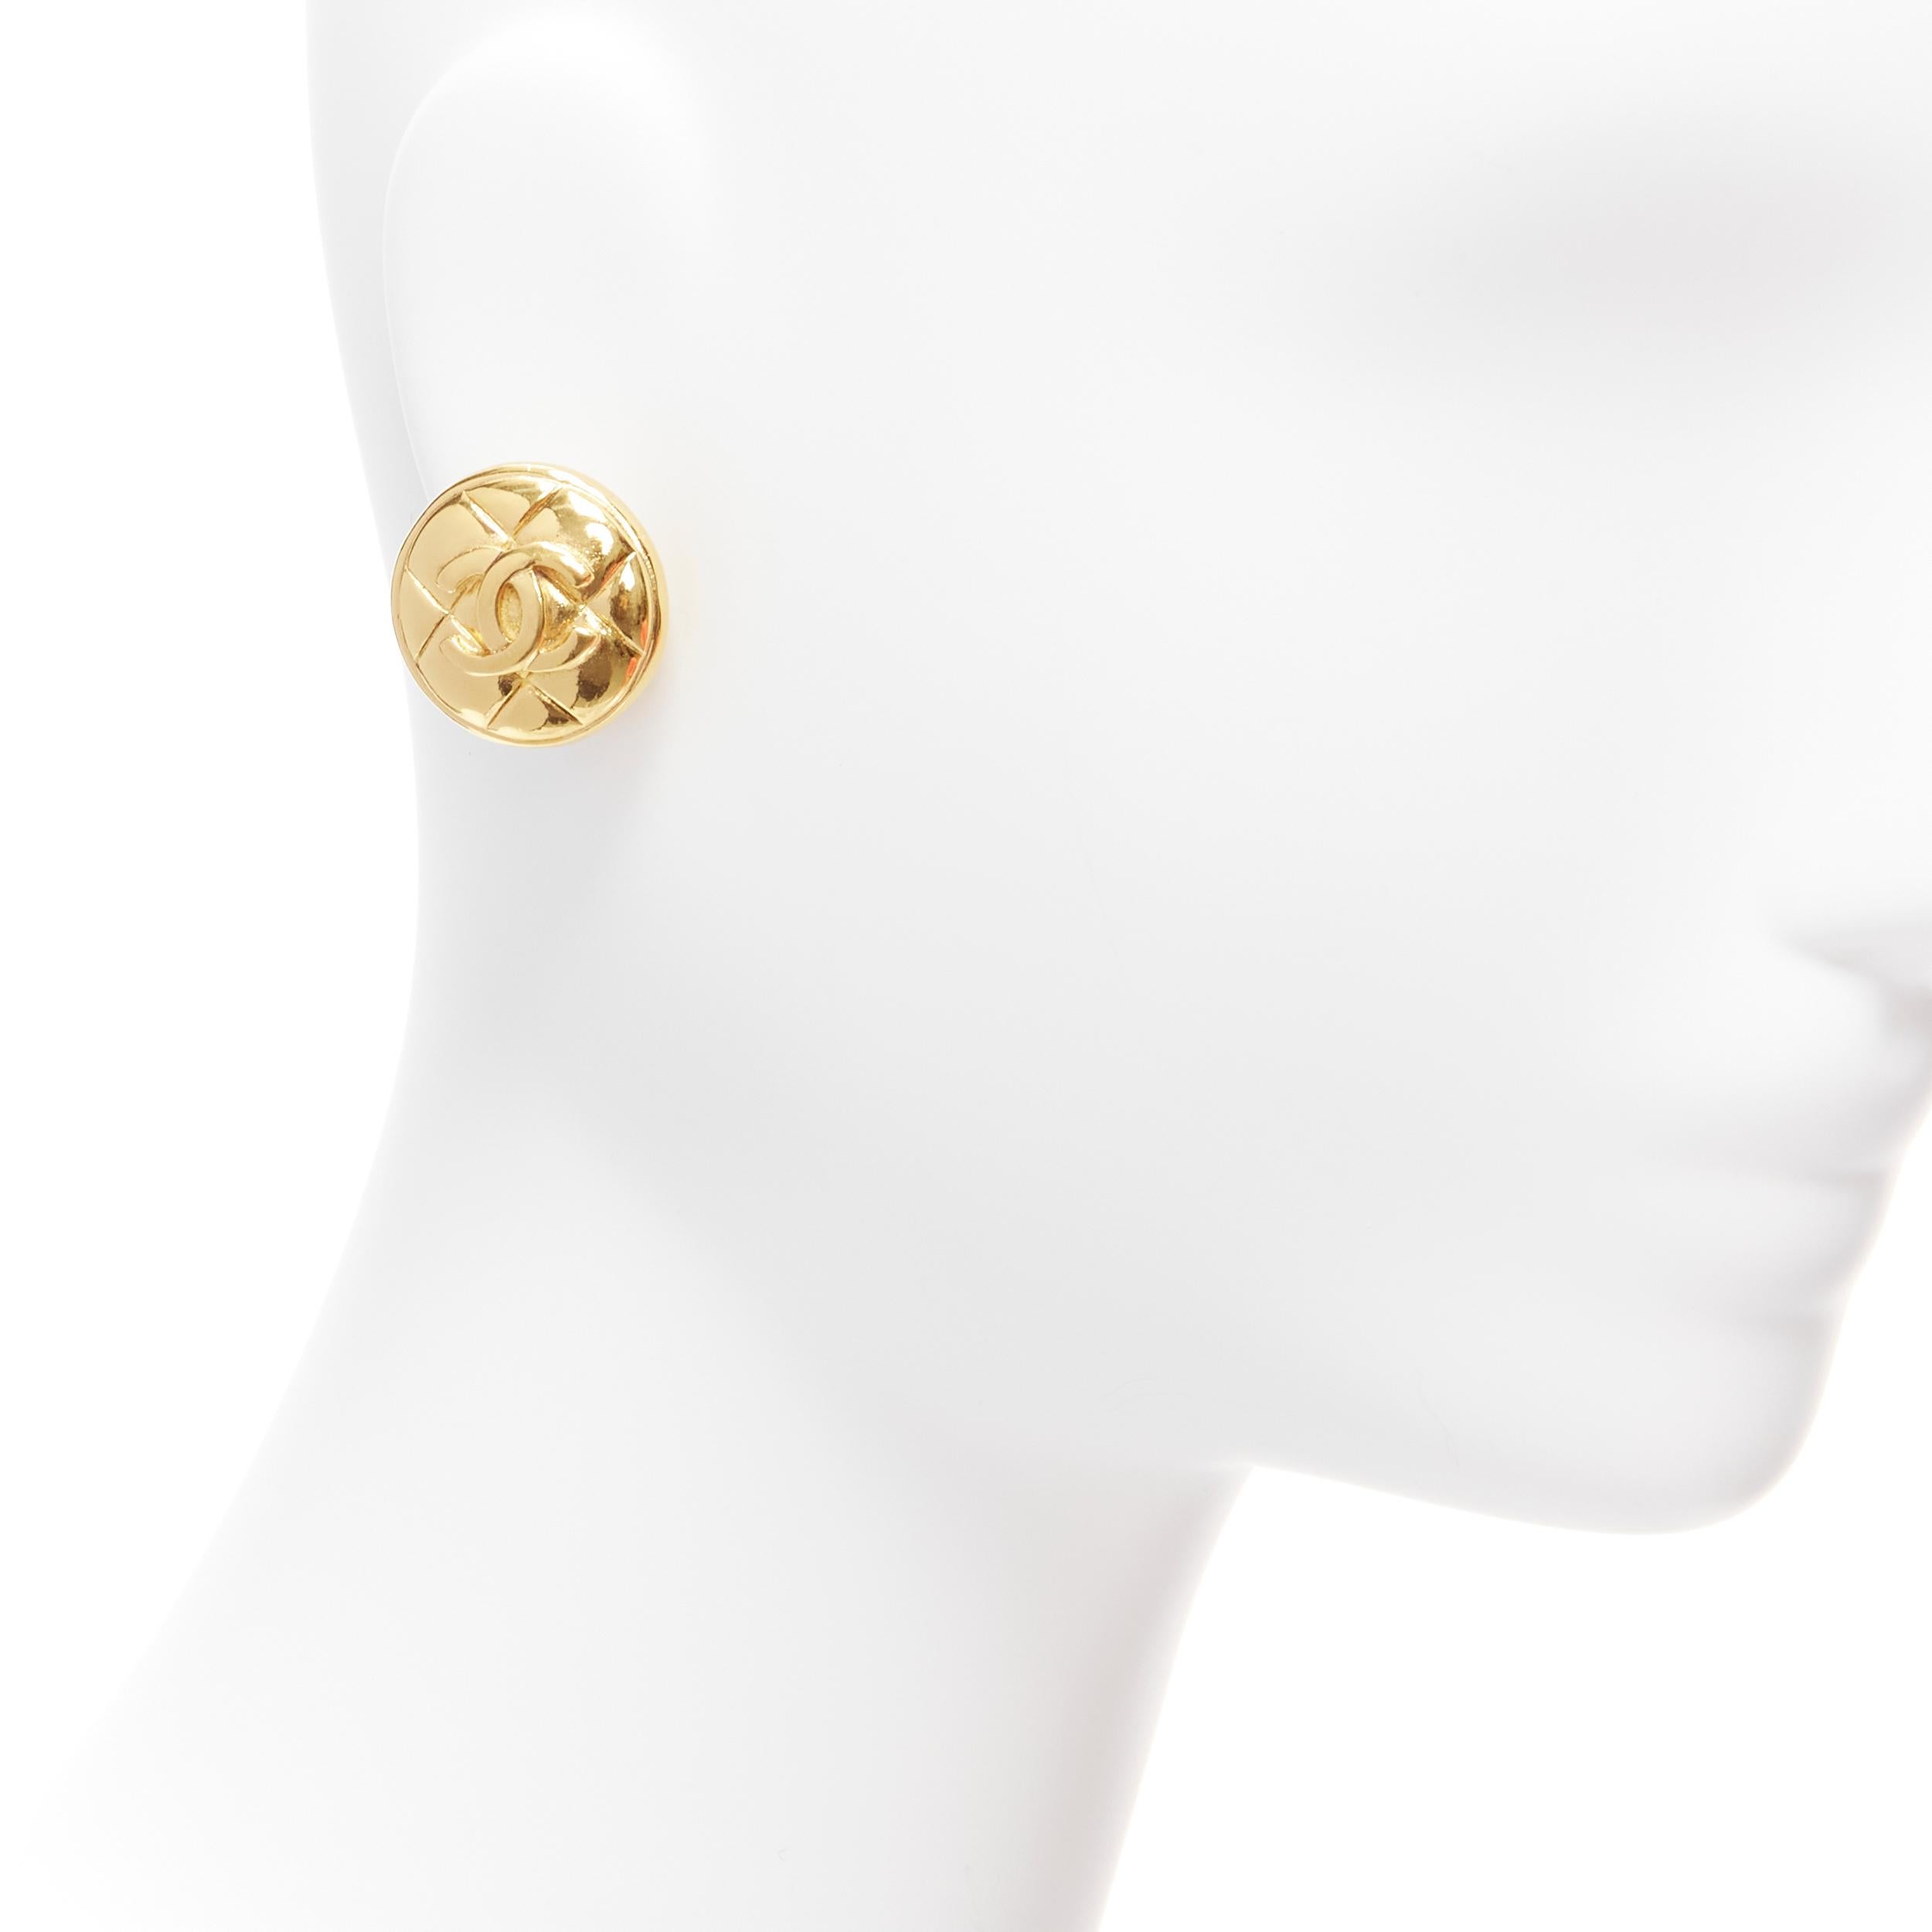 CHANEL gold tone diamond quilted CC logo medallion coin clip on earring
Reference: TGAS/D00160
Brand: Chanel
Designer: Karl Lagerfeld
Material: Metal
Color: Gold
Pattern: Solid
Closure: Clip On
Made in: France

CONDITION:
Condition: Good, this item